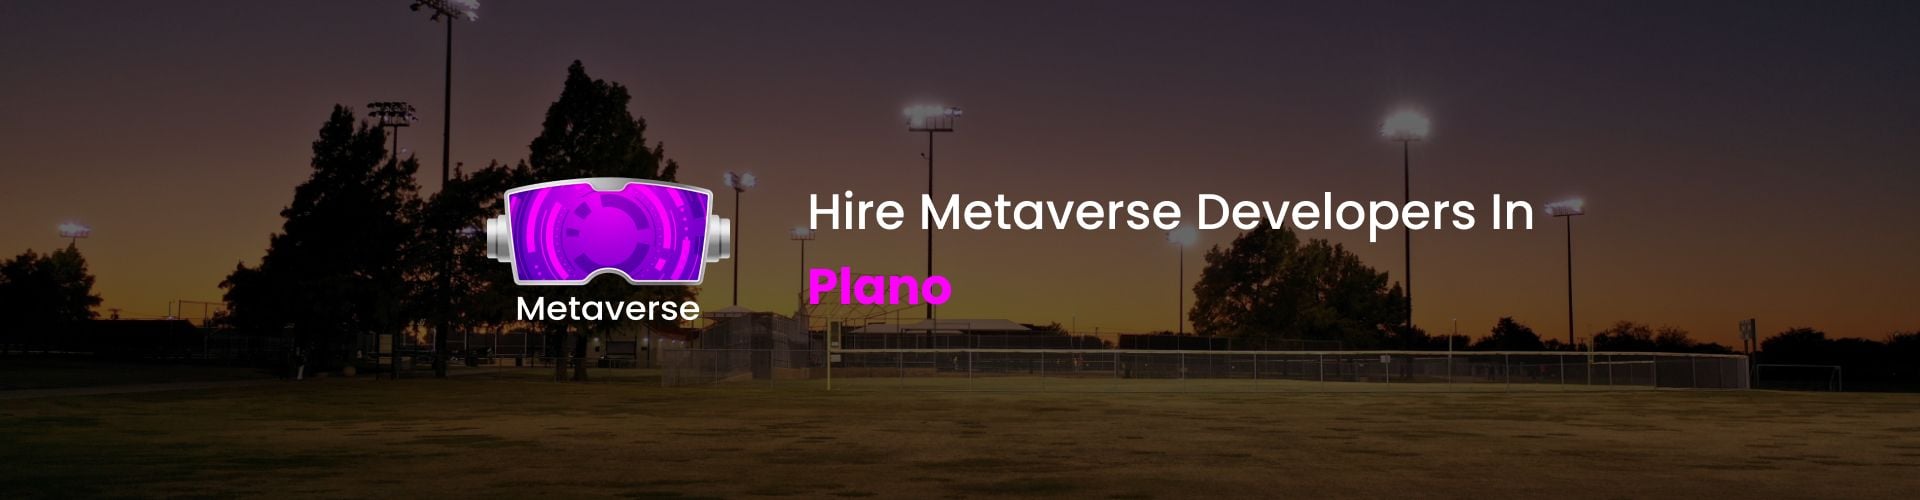 hire metaverse developers in plano